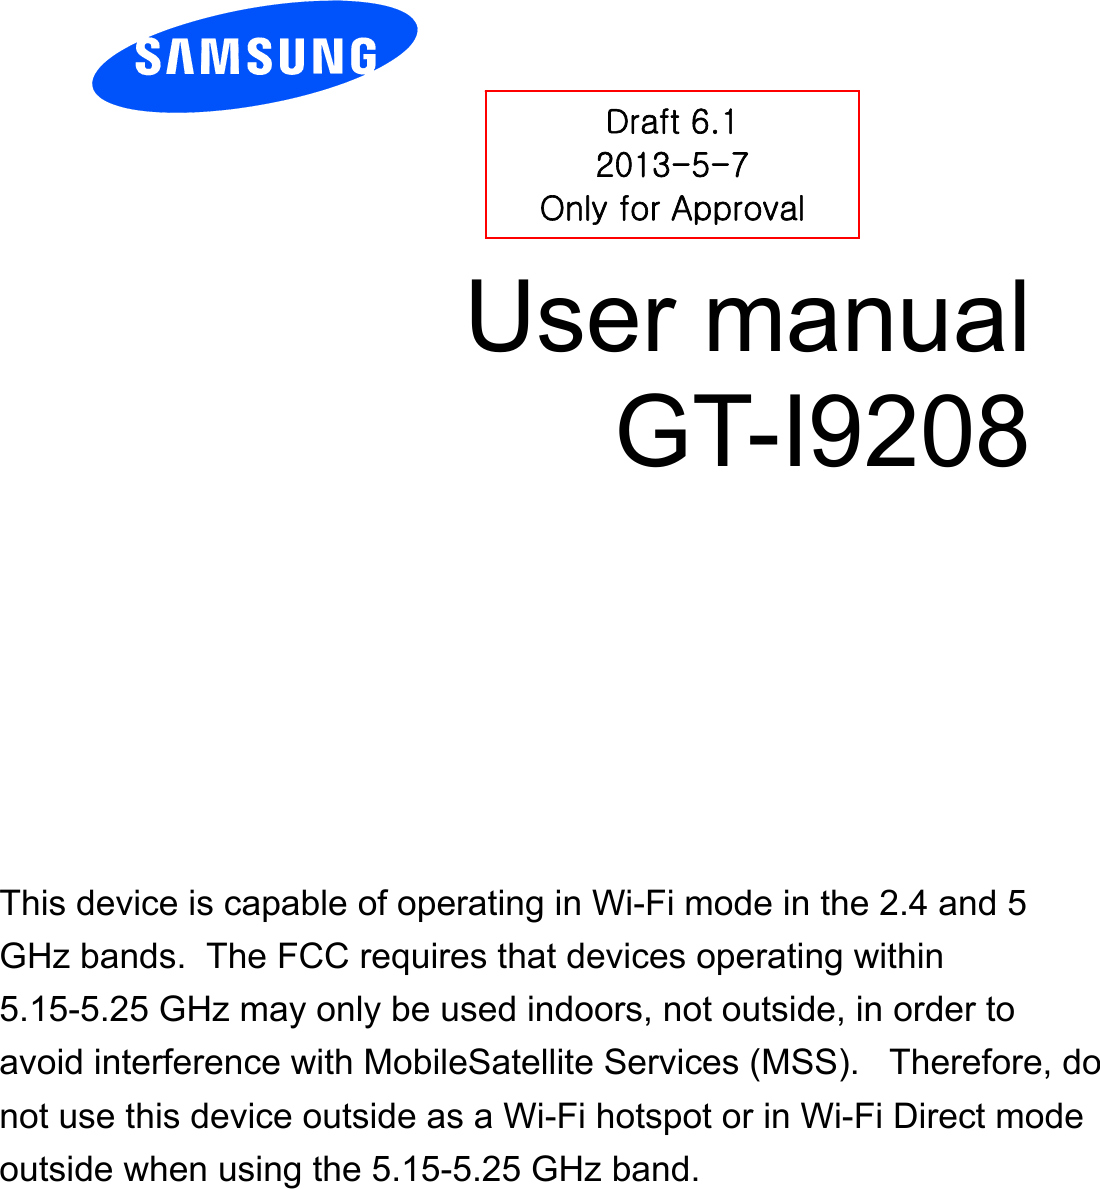         User manual GT-I9208          Draft 6.1 2013-5-7 Only for Approval This device is capable of operating in Wi-Fi mode in the 2.4 and 5 GHz bands.  The FCC requires that devices operating within 5.15-5.25 GHz may only be used indoors, not outside, in order to avoid interference with MobileSatellite Services (MSS).   Therefore, do not use this device outside as a Wi-Fi hotspot or in Wi-Fi Direct mode outside when using the 5.15-5.25 GHz band.